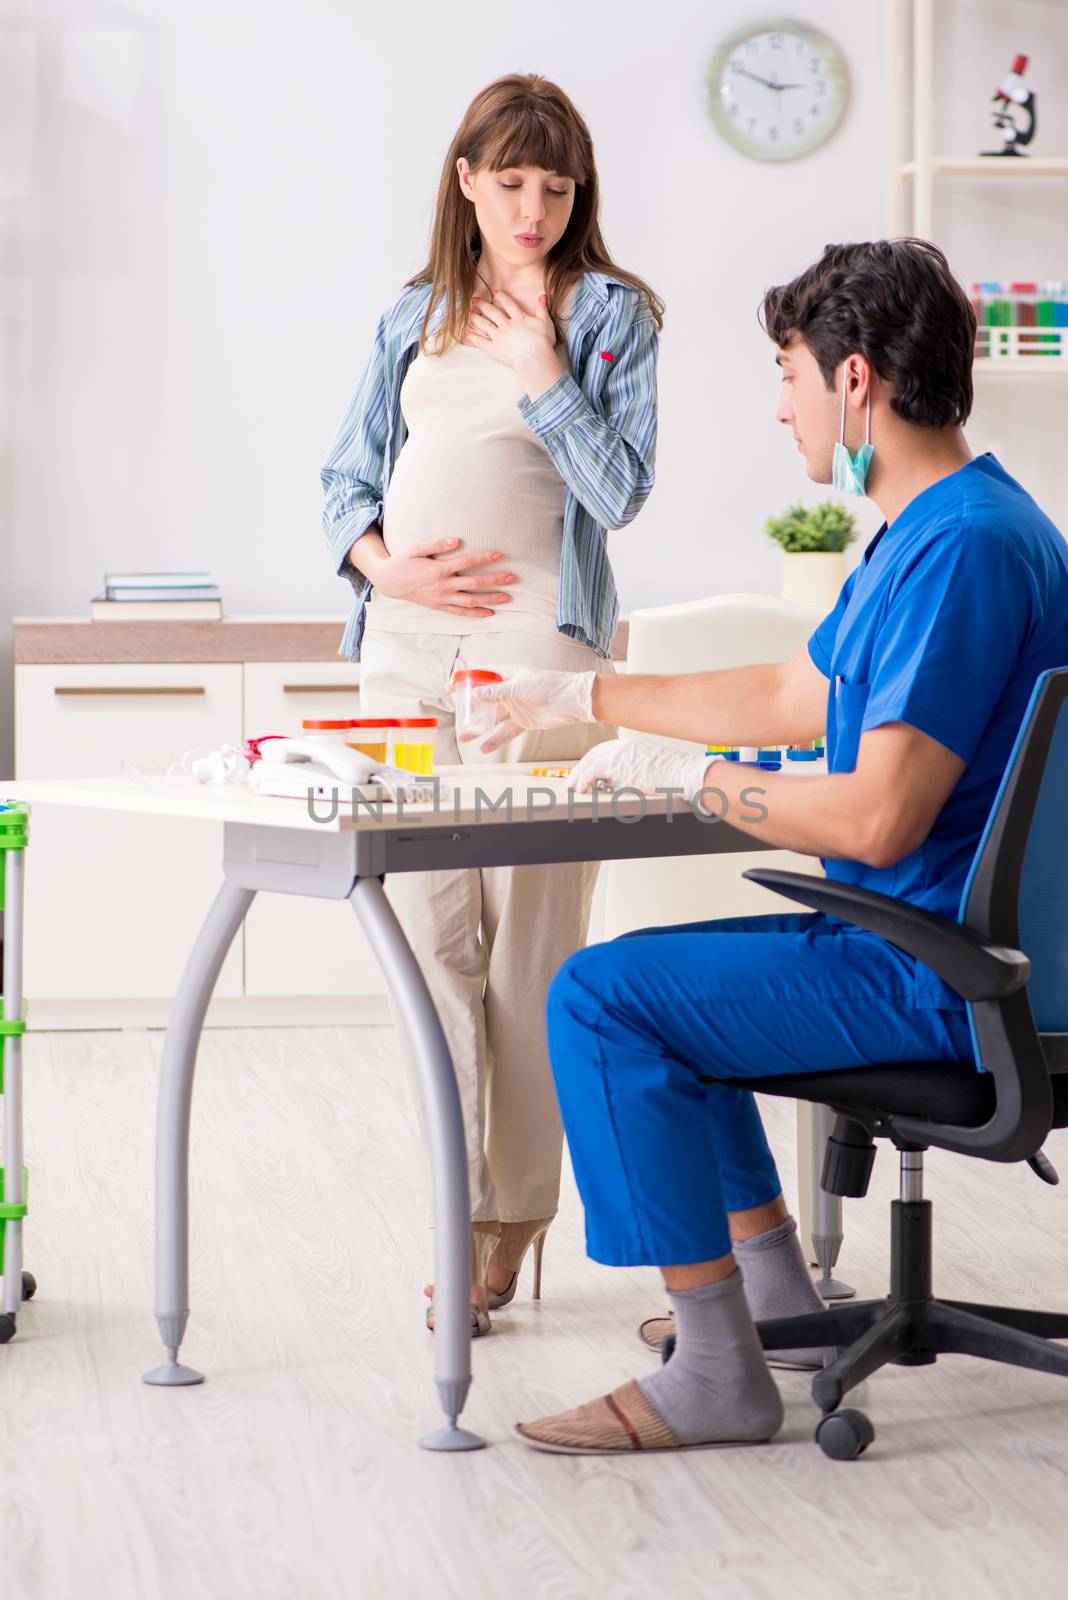 Pregnant woman visiting doctor for check-up by Elnur